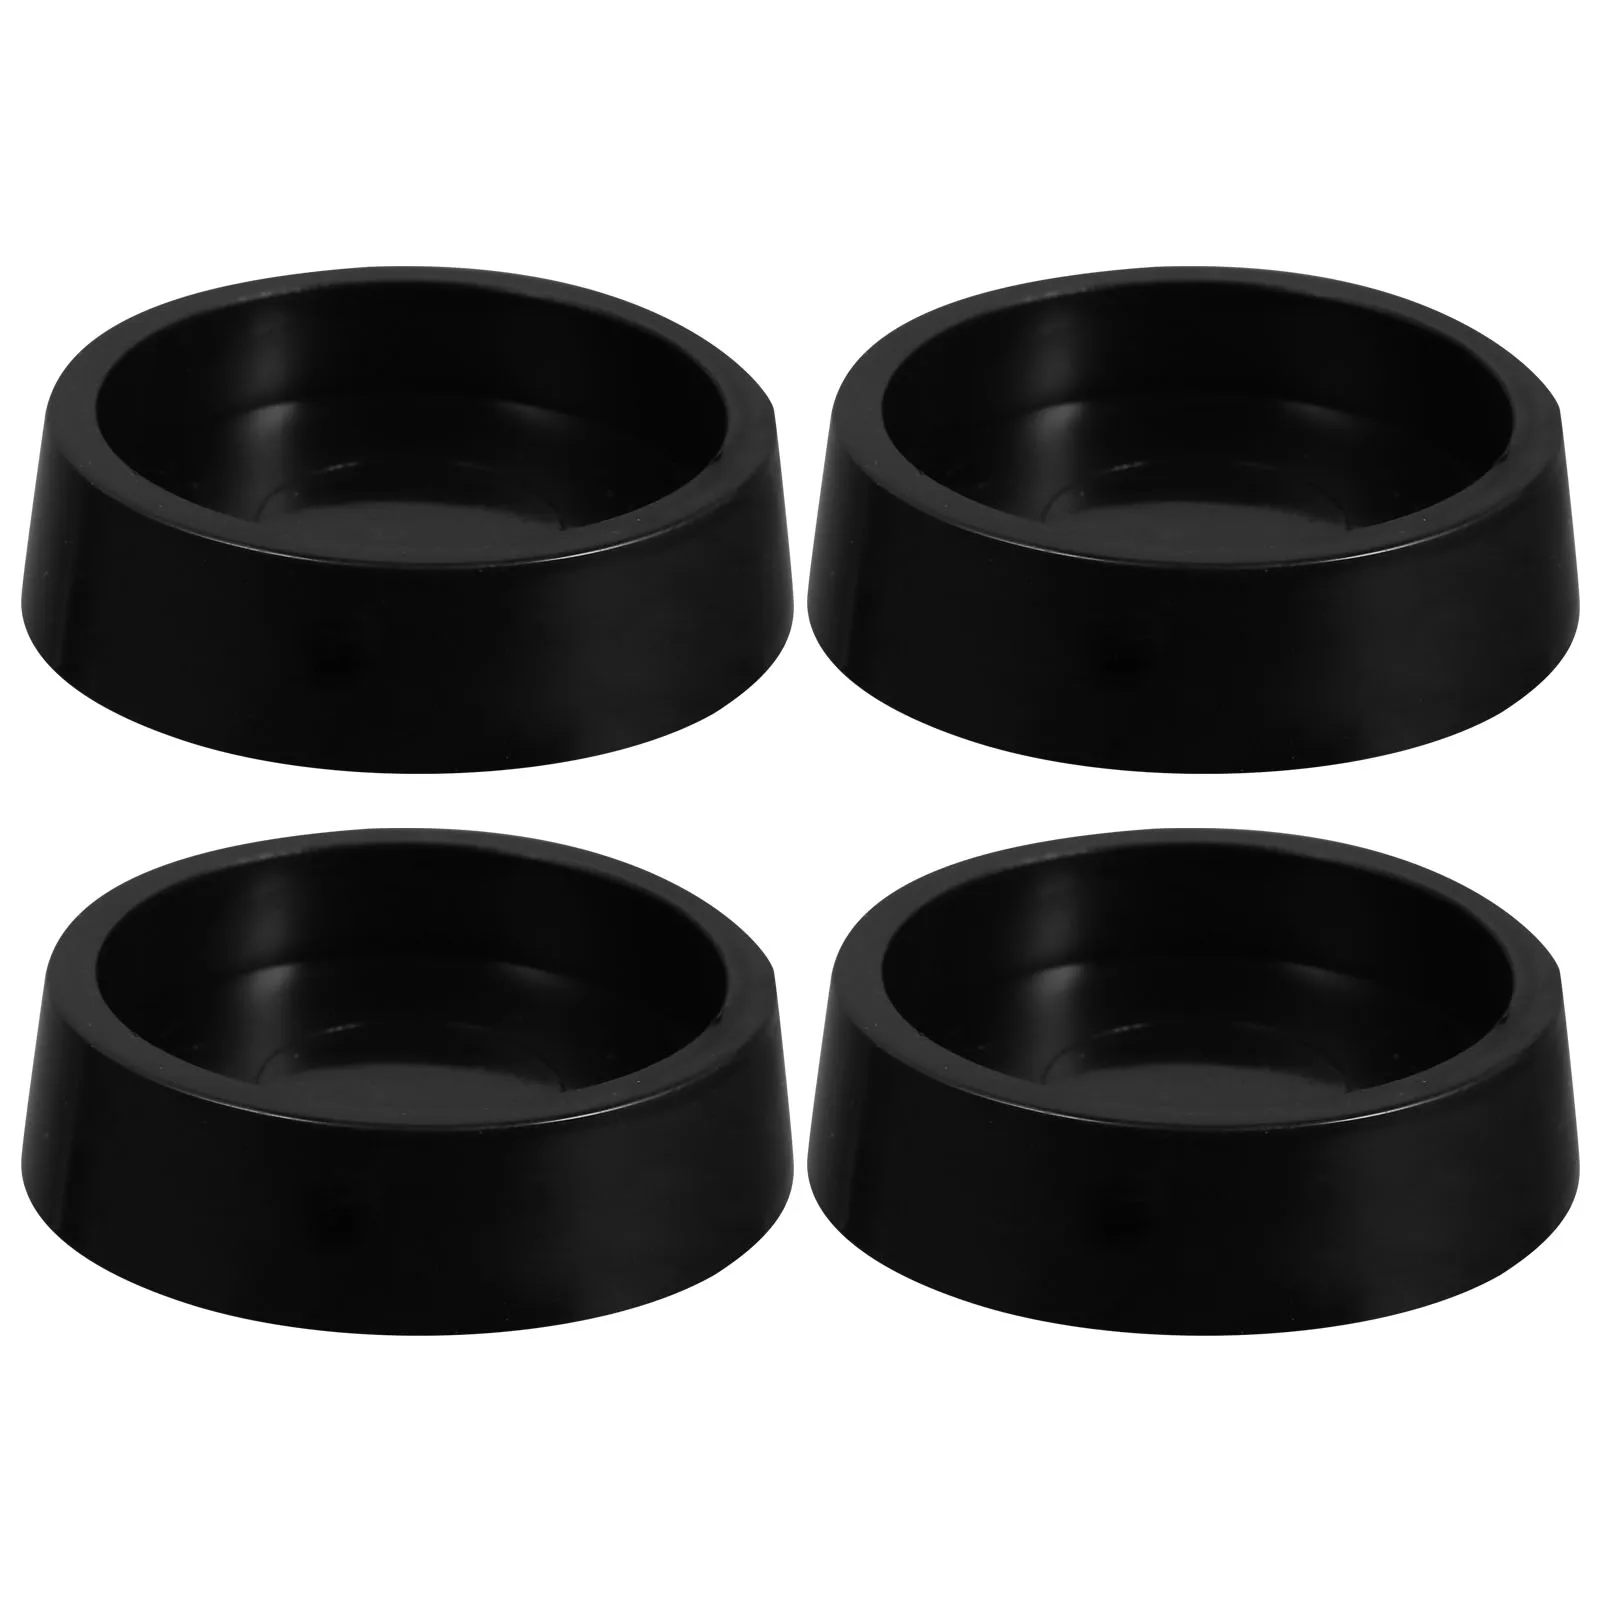 Sale Special Price 4pcs Non-Skid Furniture Rubber Caster Coasters Wh Cups Shipping included